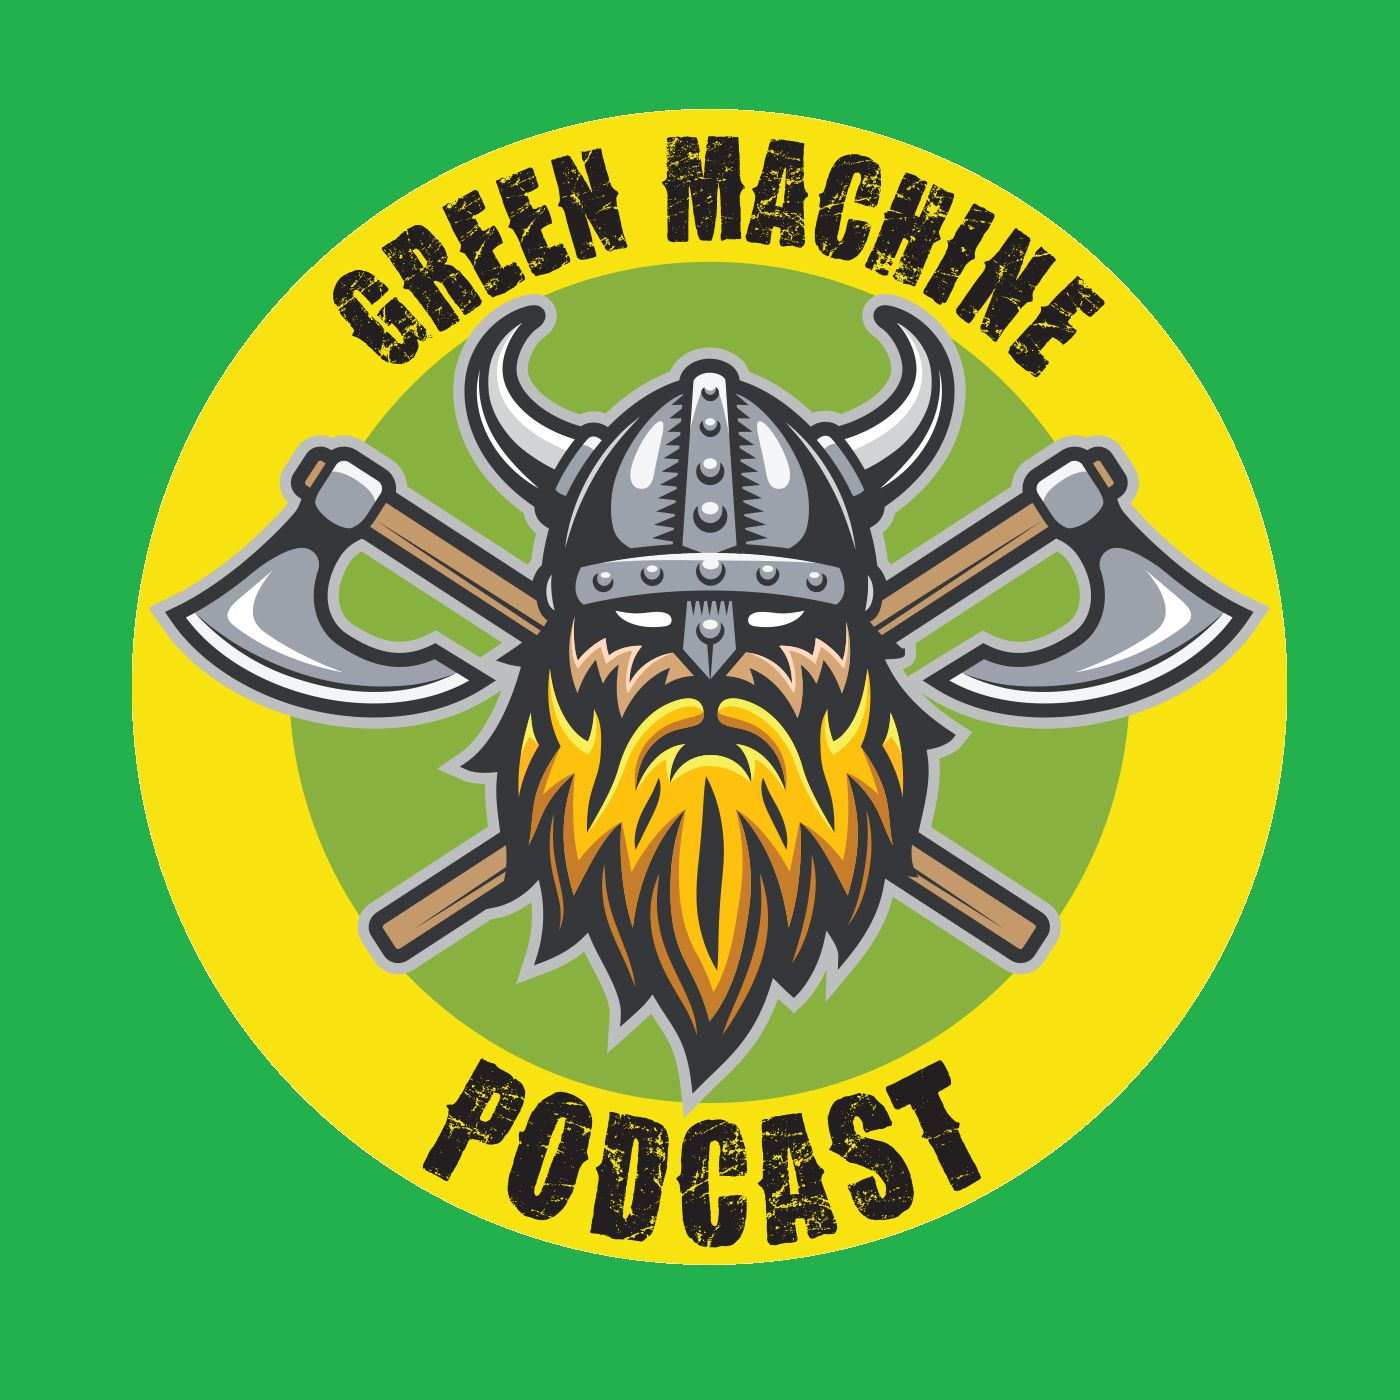 Green Machine Podcast - Episode 172 - On That Note